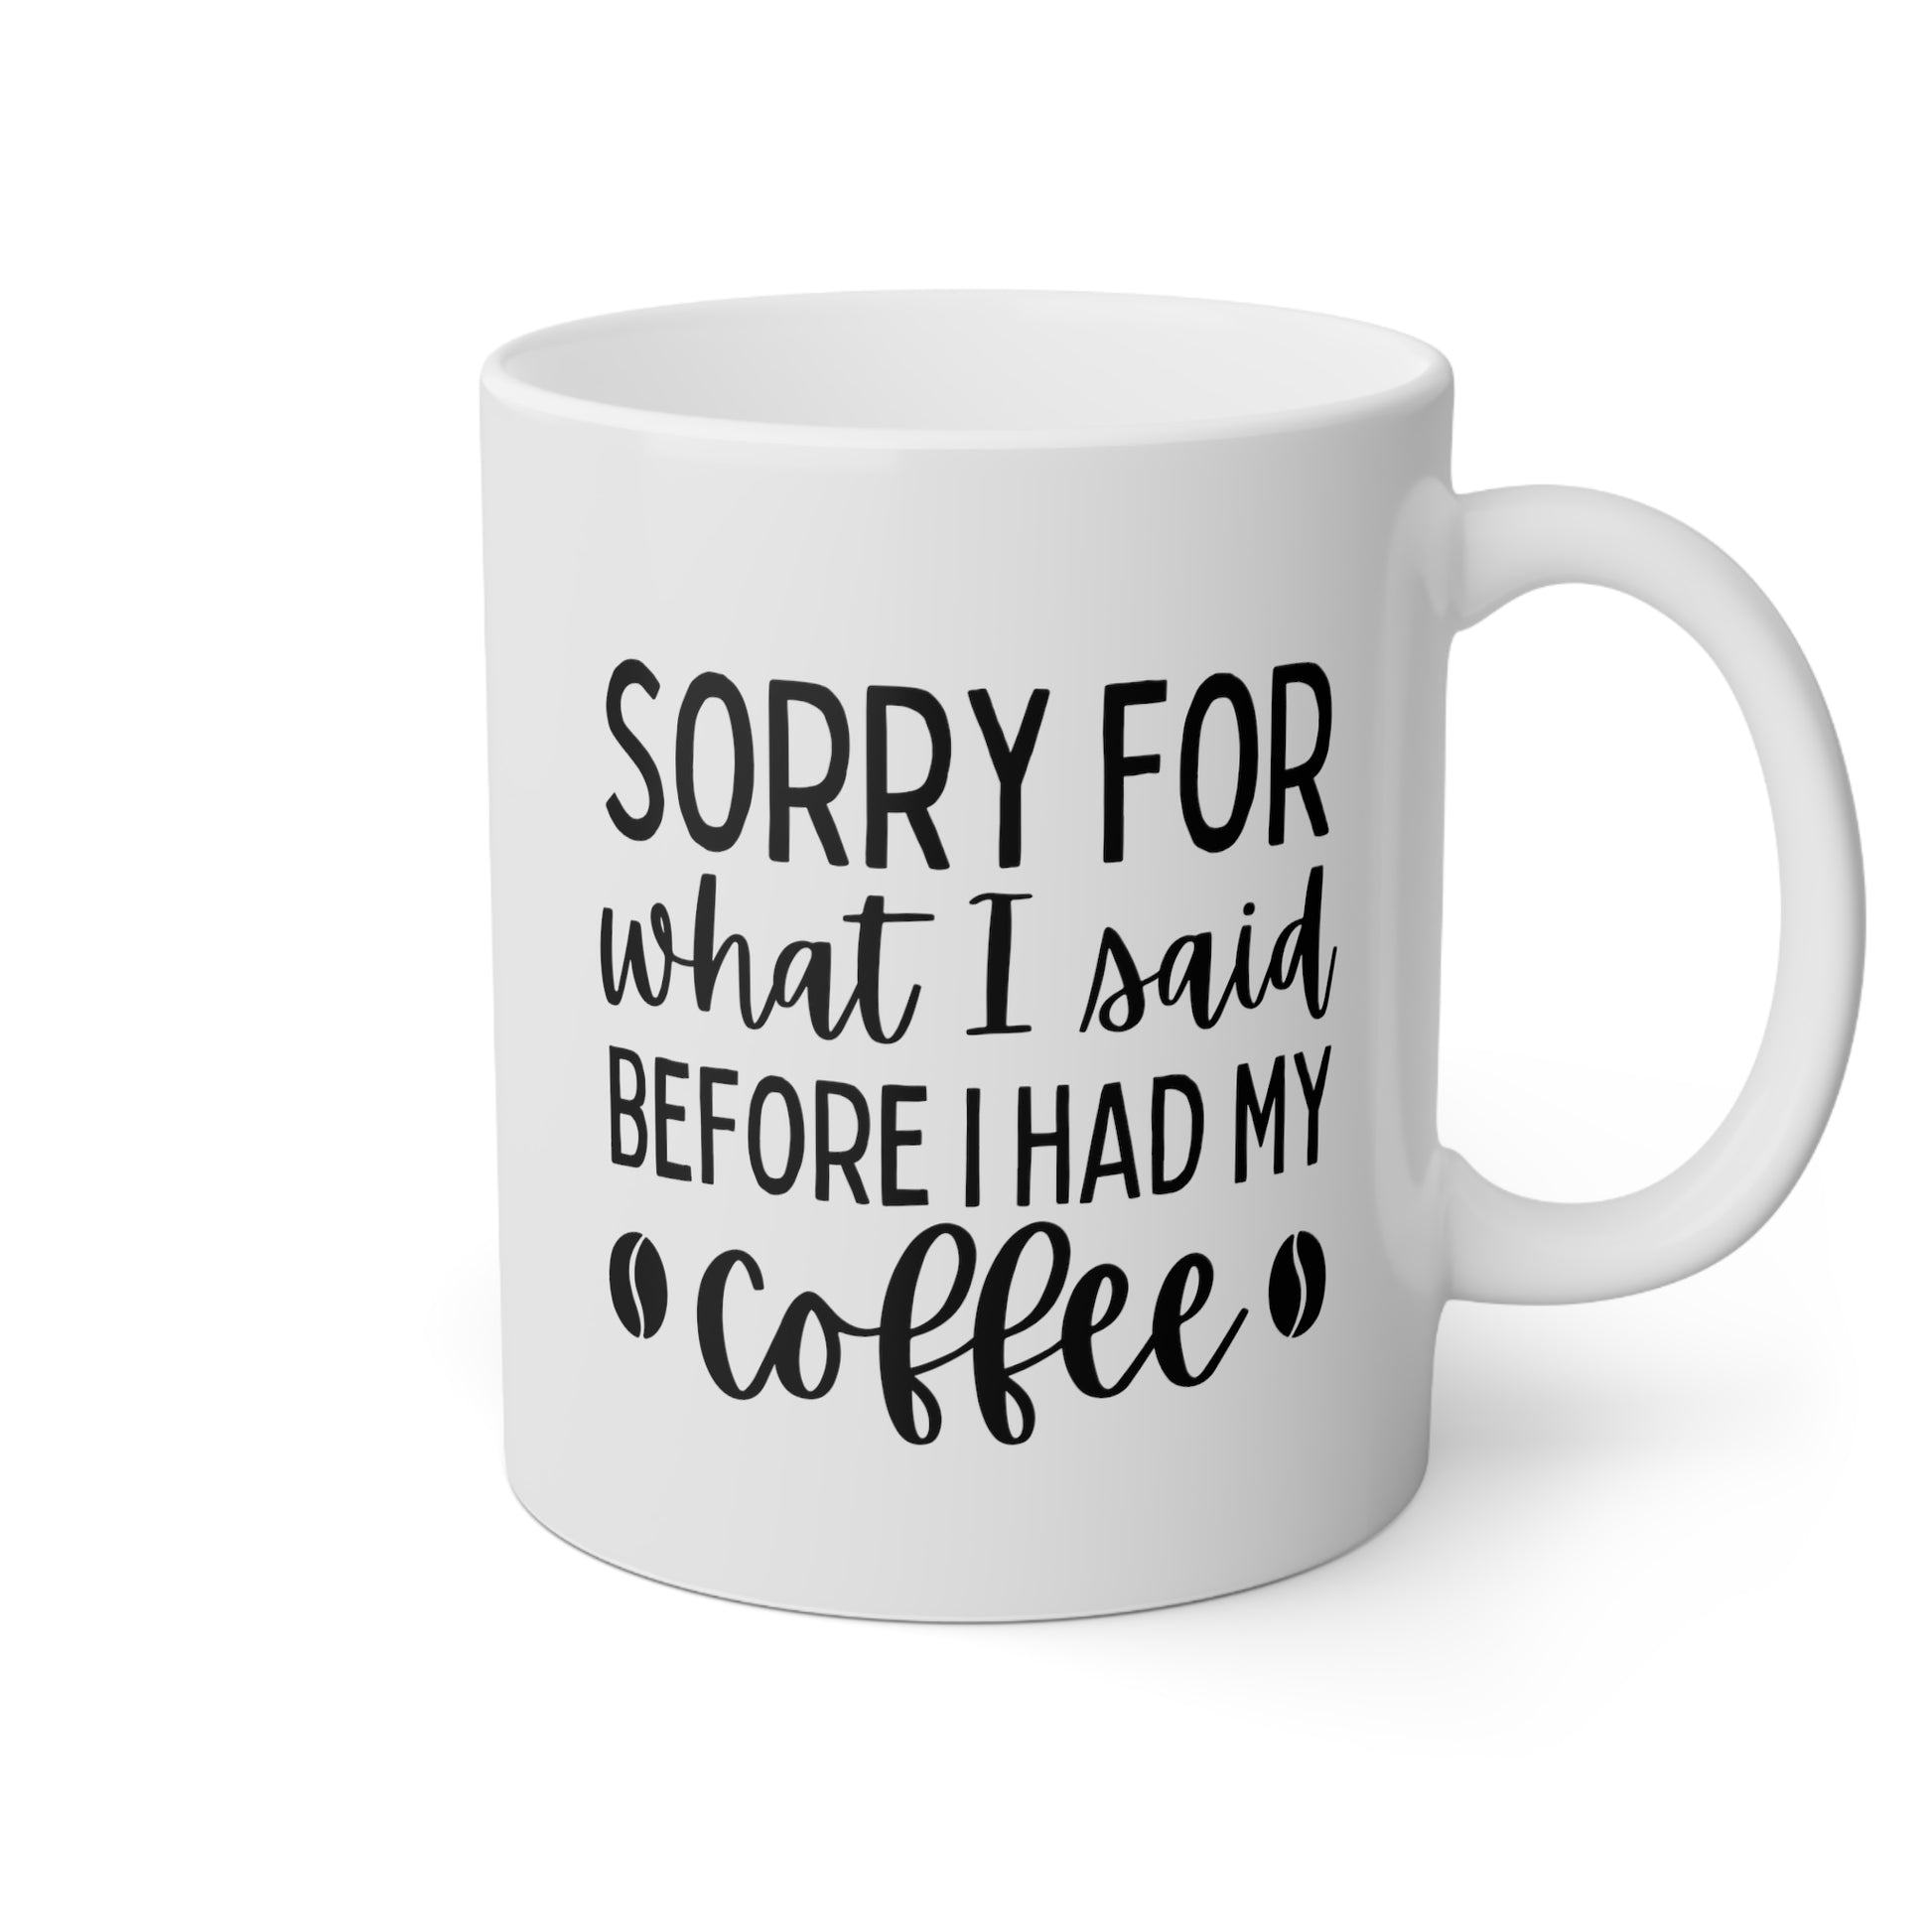 Sorry For What I Said Before I Had My Coffee 11oz white funny large coffee mug gift for friends family coffee lover fun present waveywares wavey wares wavywares wavy wares